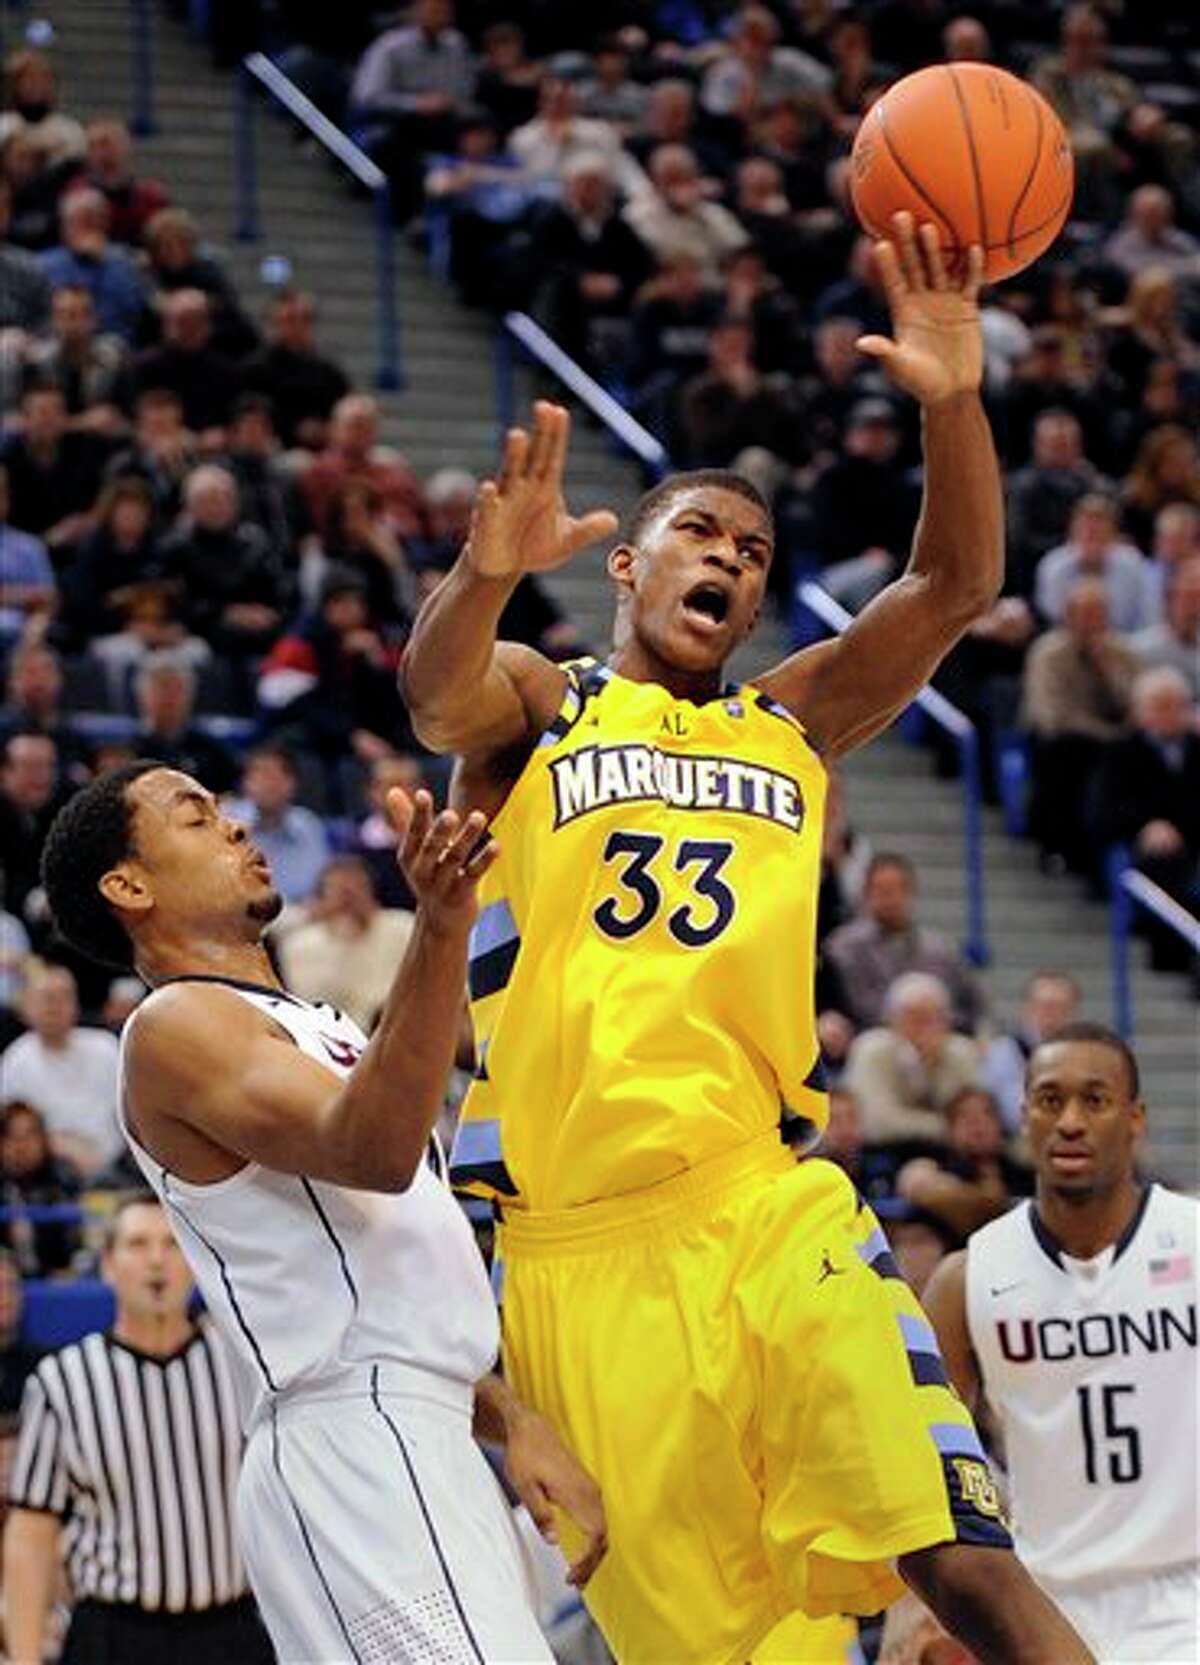 Marquette's Jimmy Butler, right, is fouled by UConn's Jamal Coombs-McDaniel during the first half of an NCAA college basketball game in Hartford, Conn., on Thursday, Feb. 24, 2011.  